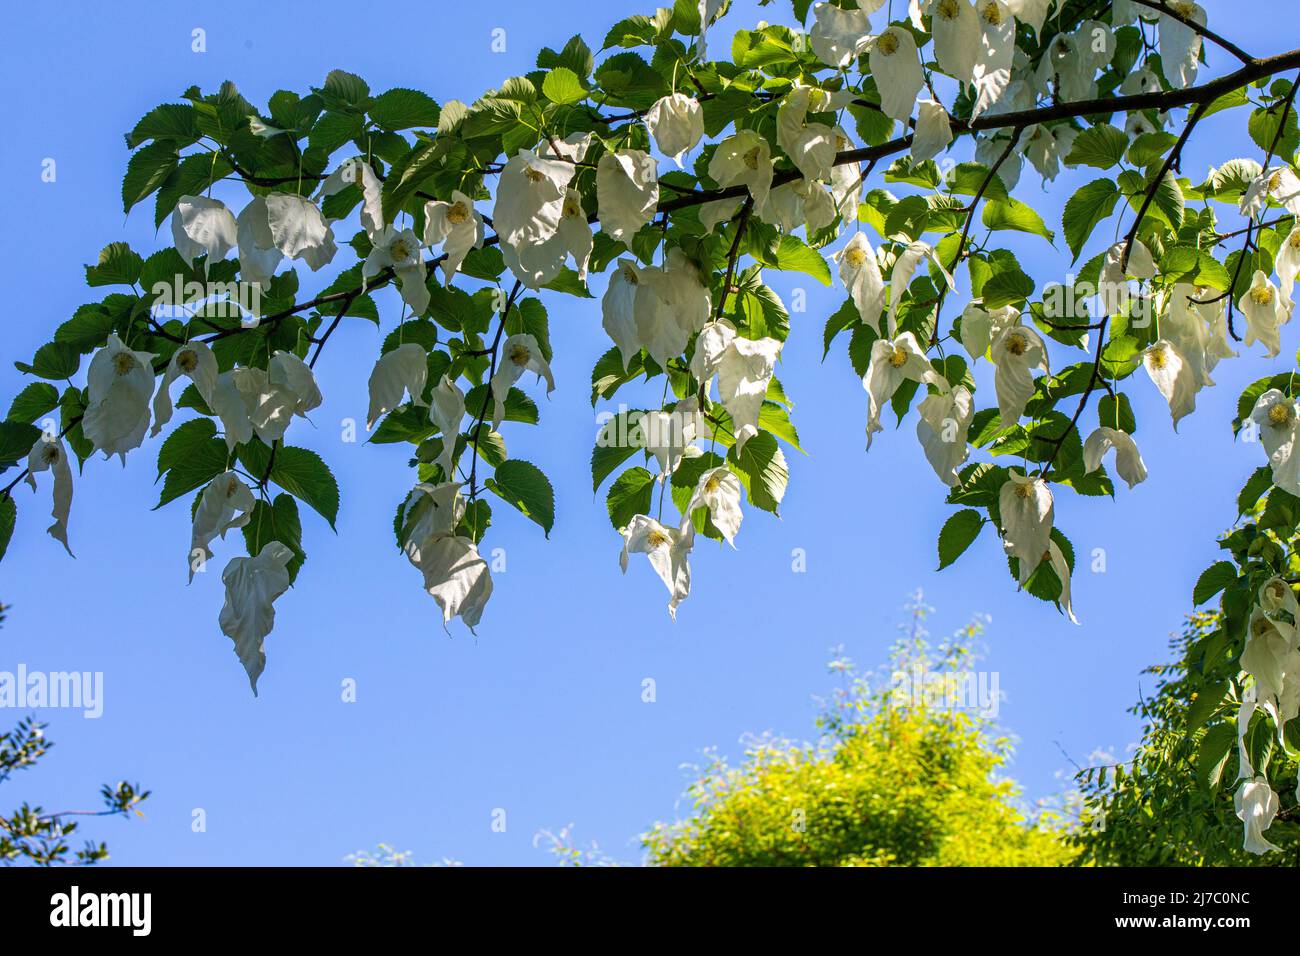 handkerchief tree is a medium-sized deciduous tree with bright green, broadly ovate leaves to 15cm in length. Stock Photo